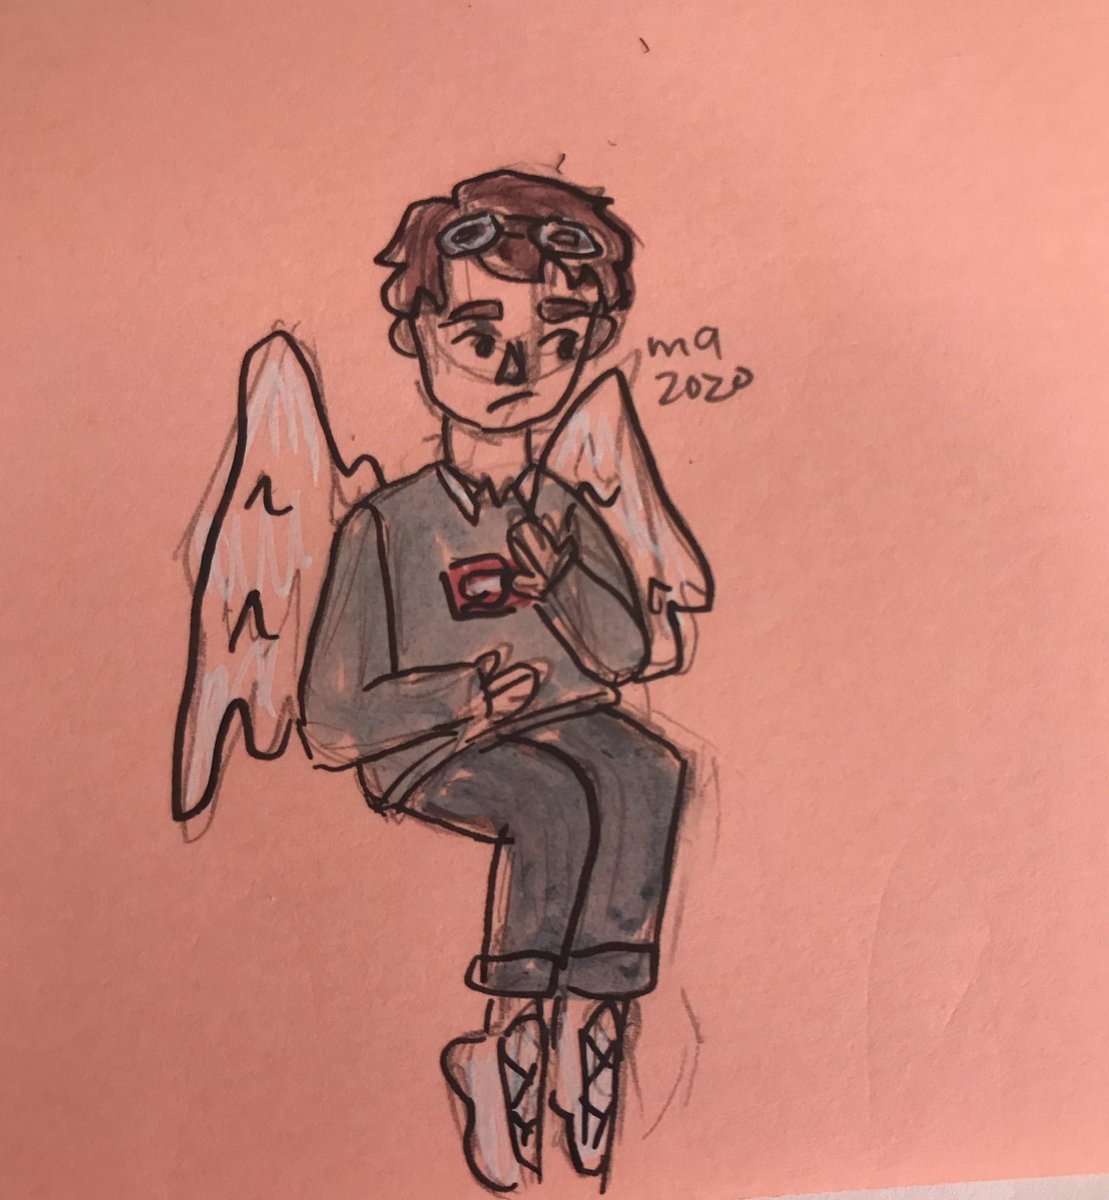 #mcyttober day 2: wings !! i was scrolling through the tag and saw @Matthias1r ‘s one and i really liked the pose. so have g o g y